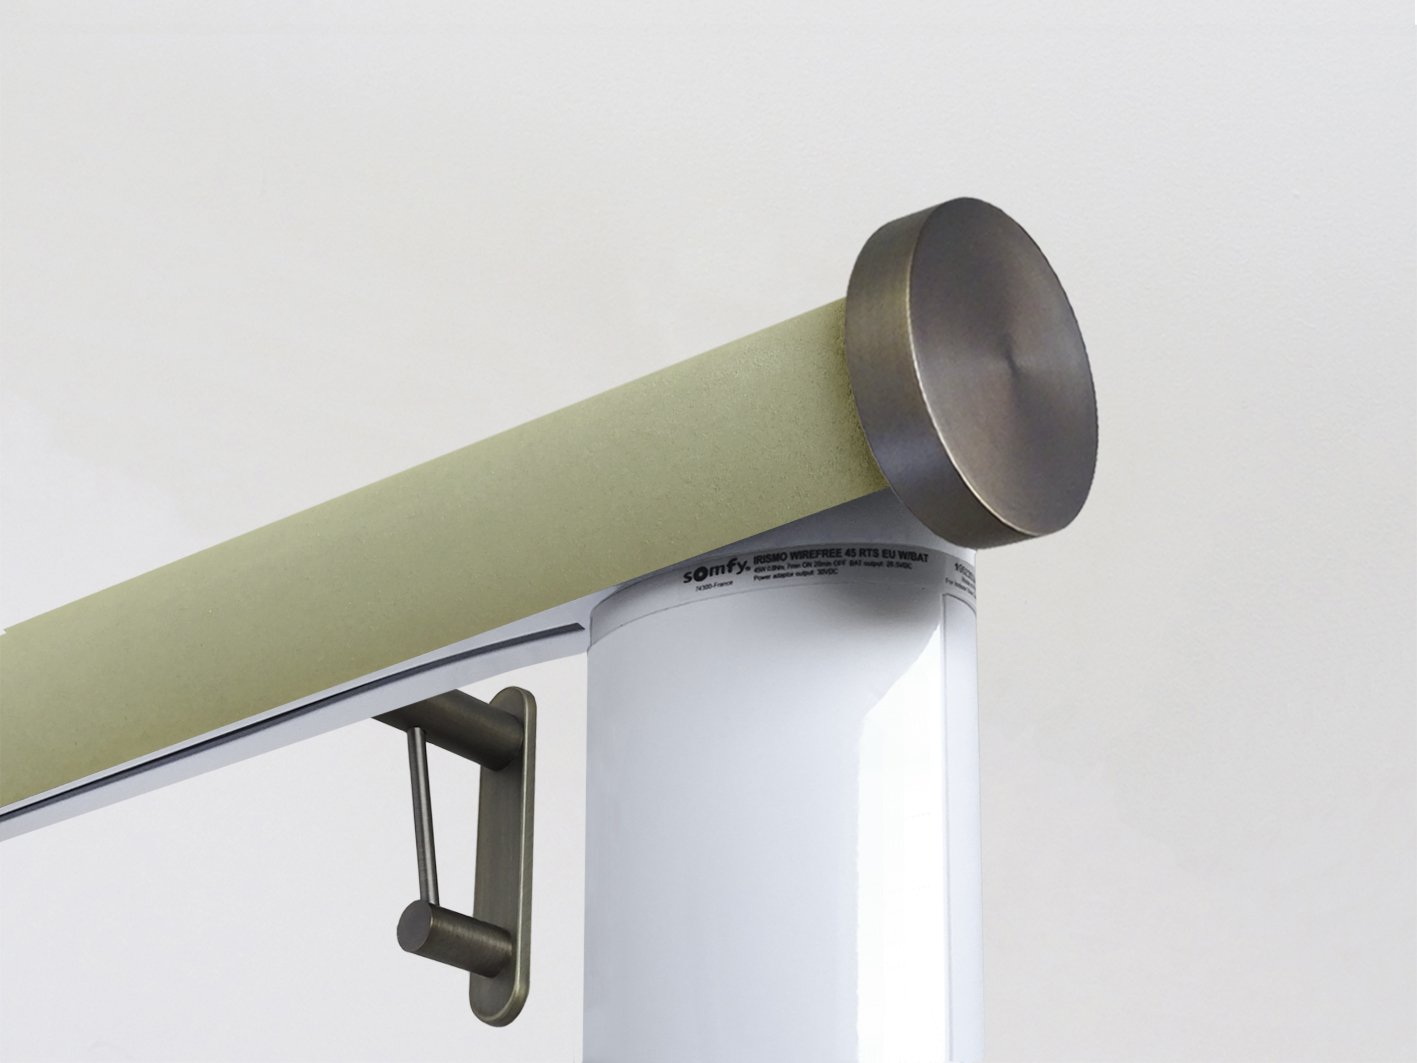 Motorised electric curtain pole in new acorn green suede, wireless & battery powered using the Somfy Glydea track | Walcot House UK curtain pole specialists